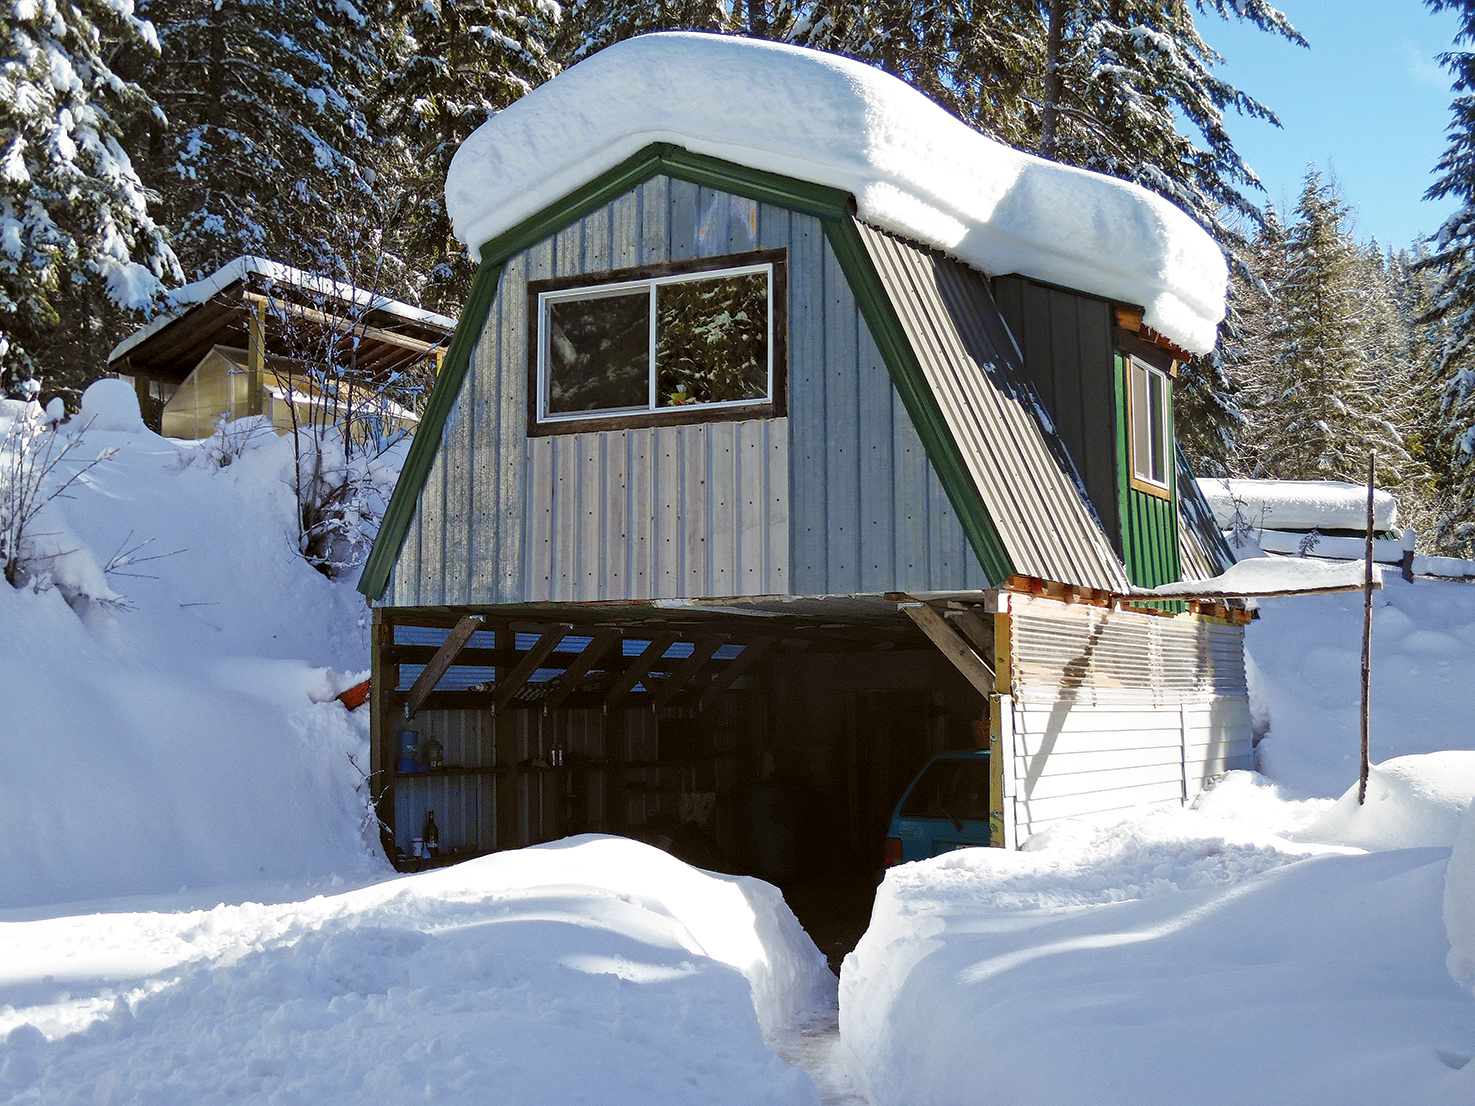 completed garage, bunkhouse, root cellar